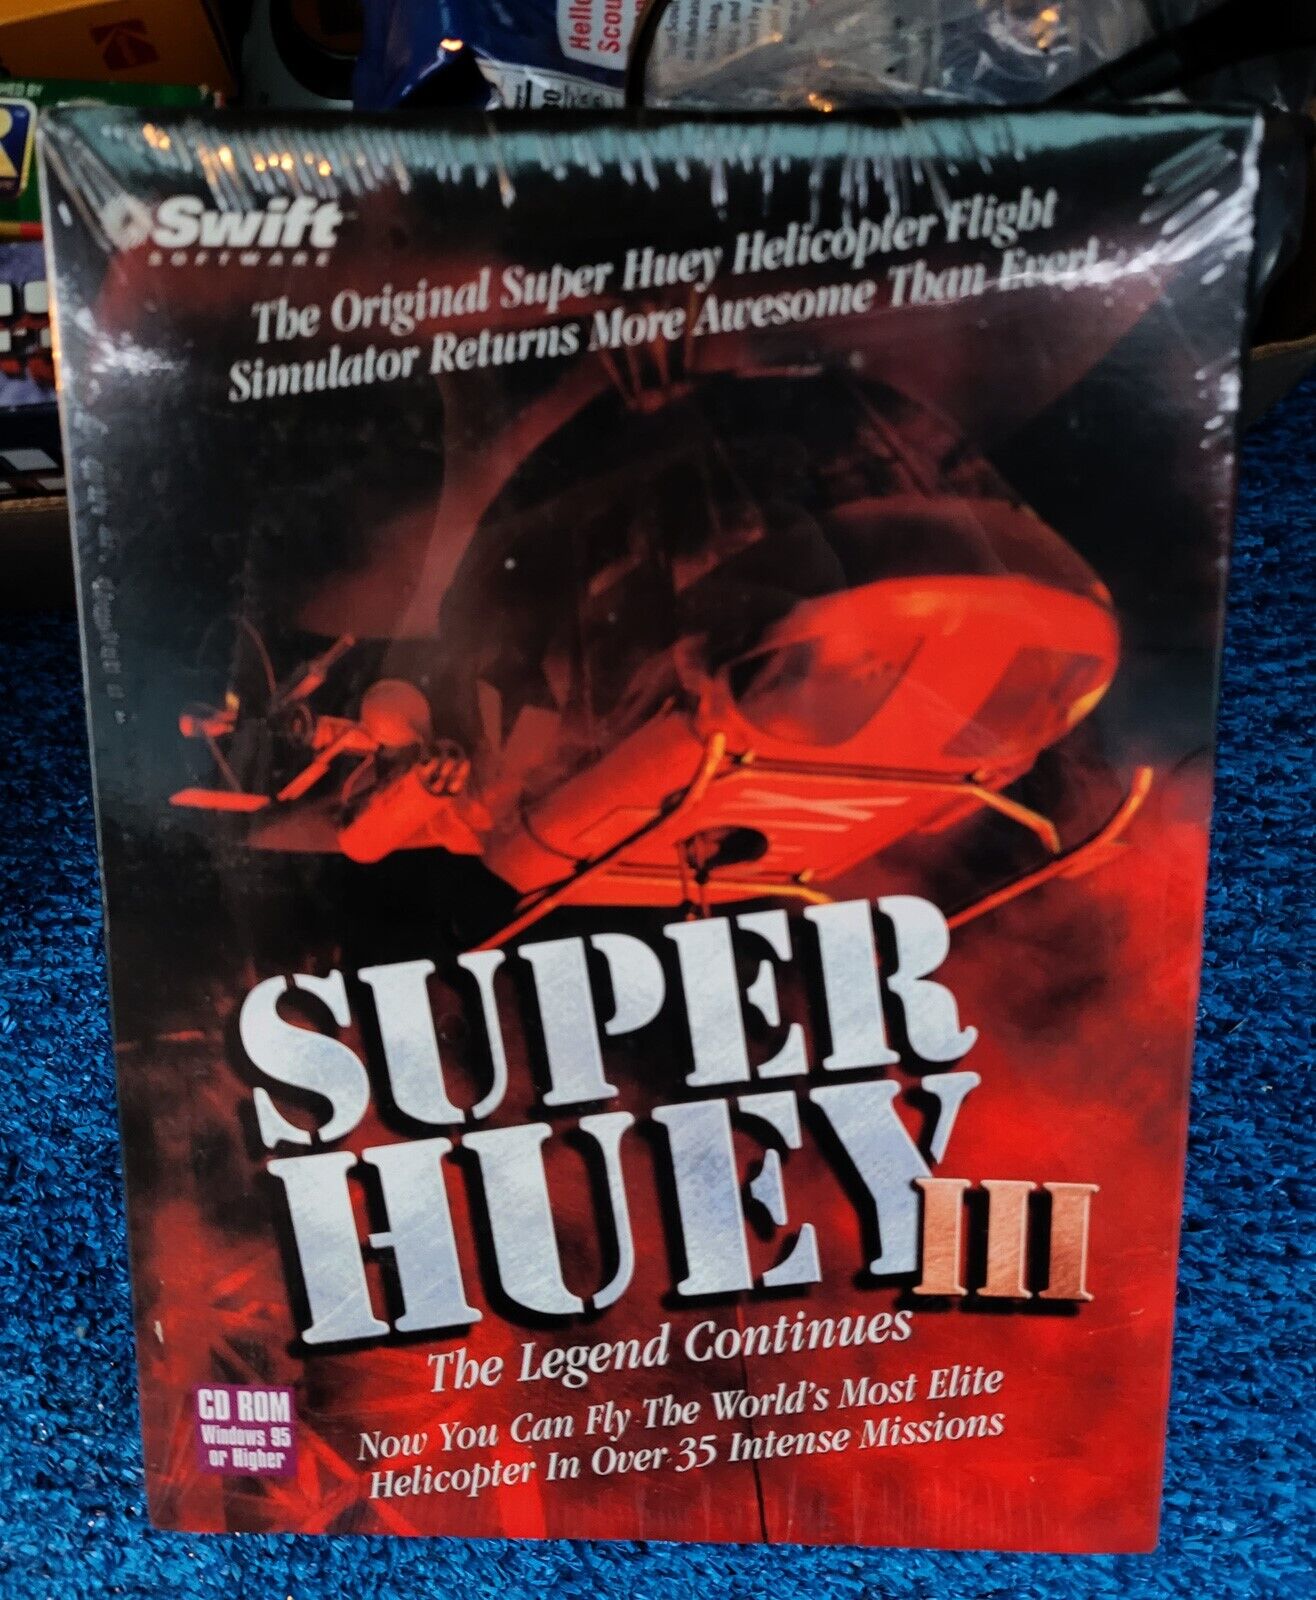 Super Huey III CD Rom Game The Legend Continues 2000 Helicoptor Simulator Sealed